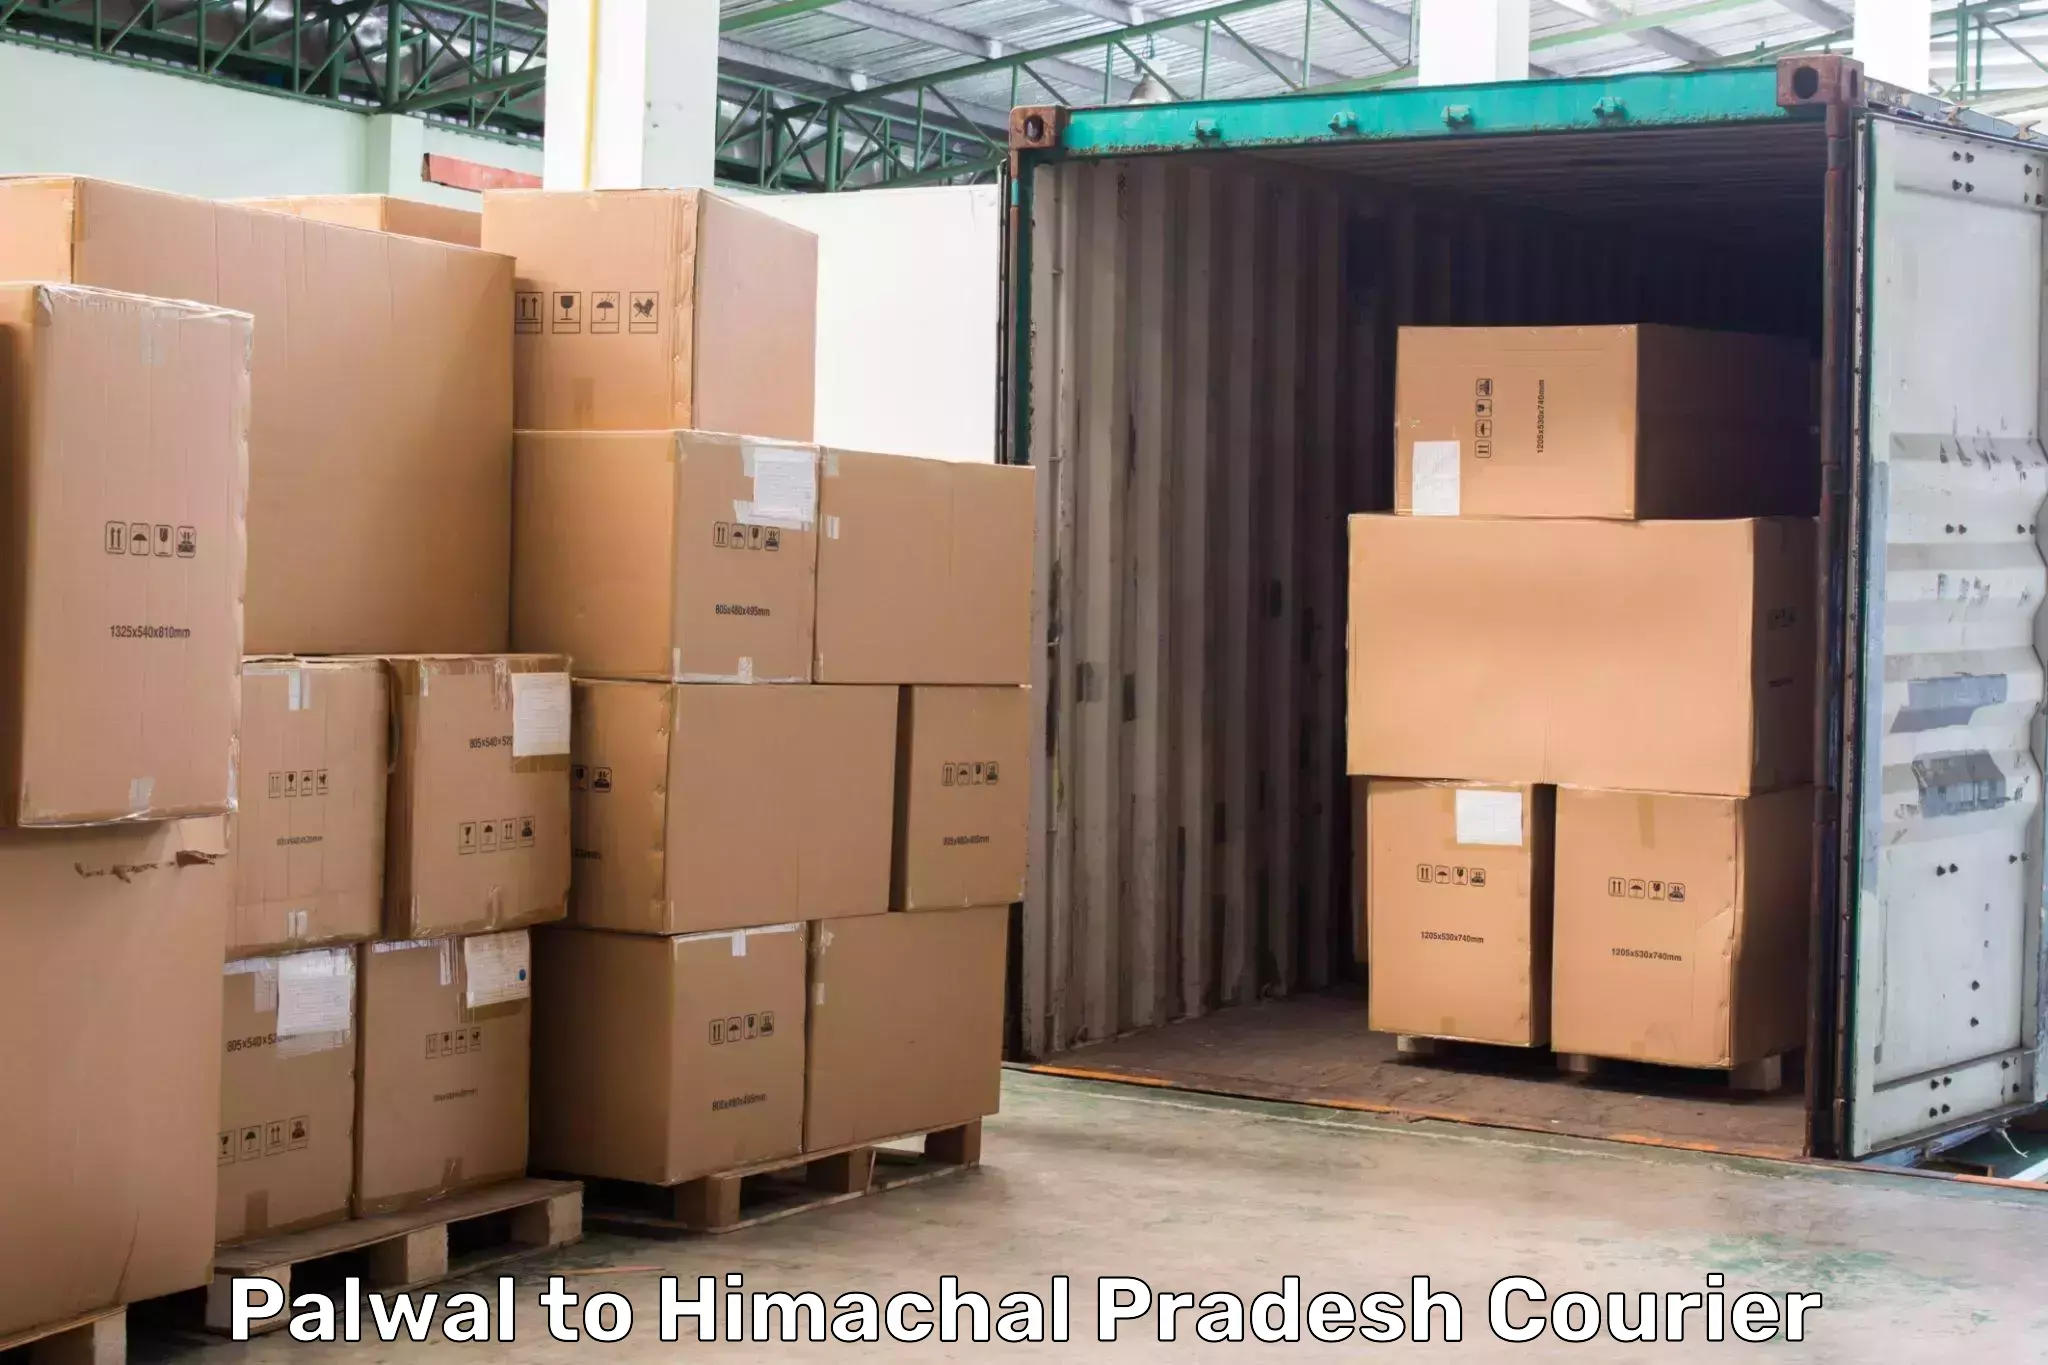 Modern delivery technologies Palwal to Himachal Pradesh